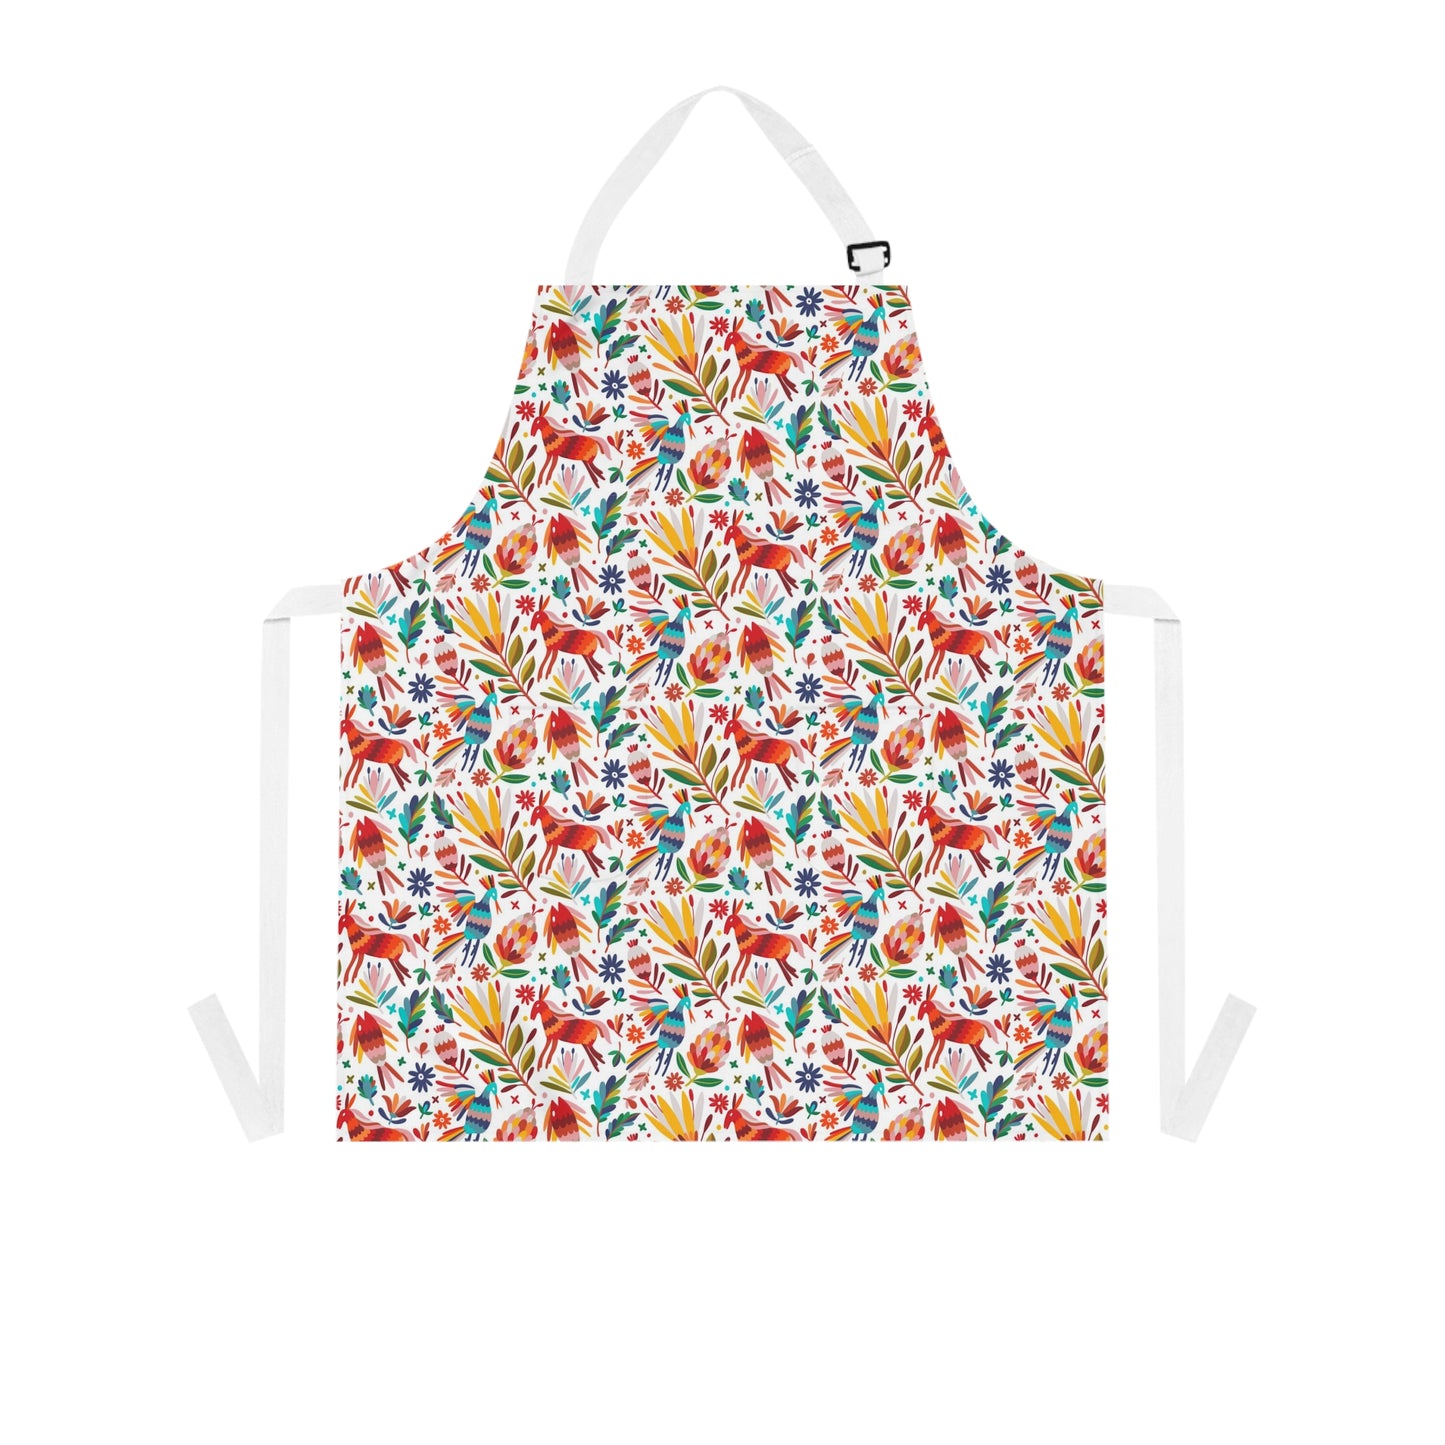 Mexican folk Apron with Otomi art for Mexican mom, Mexican food lover or Mexican chef. Gift for comadre or Tia. Mother’s Day gift ideas